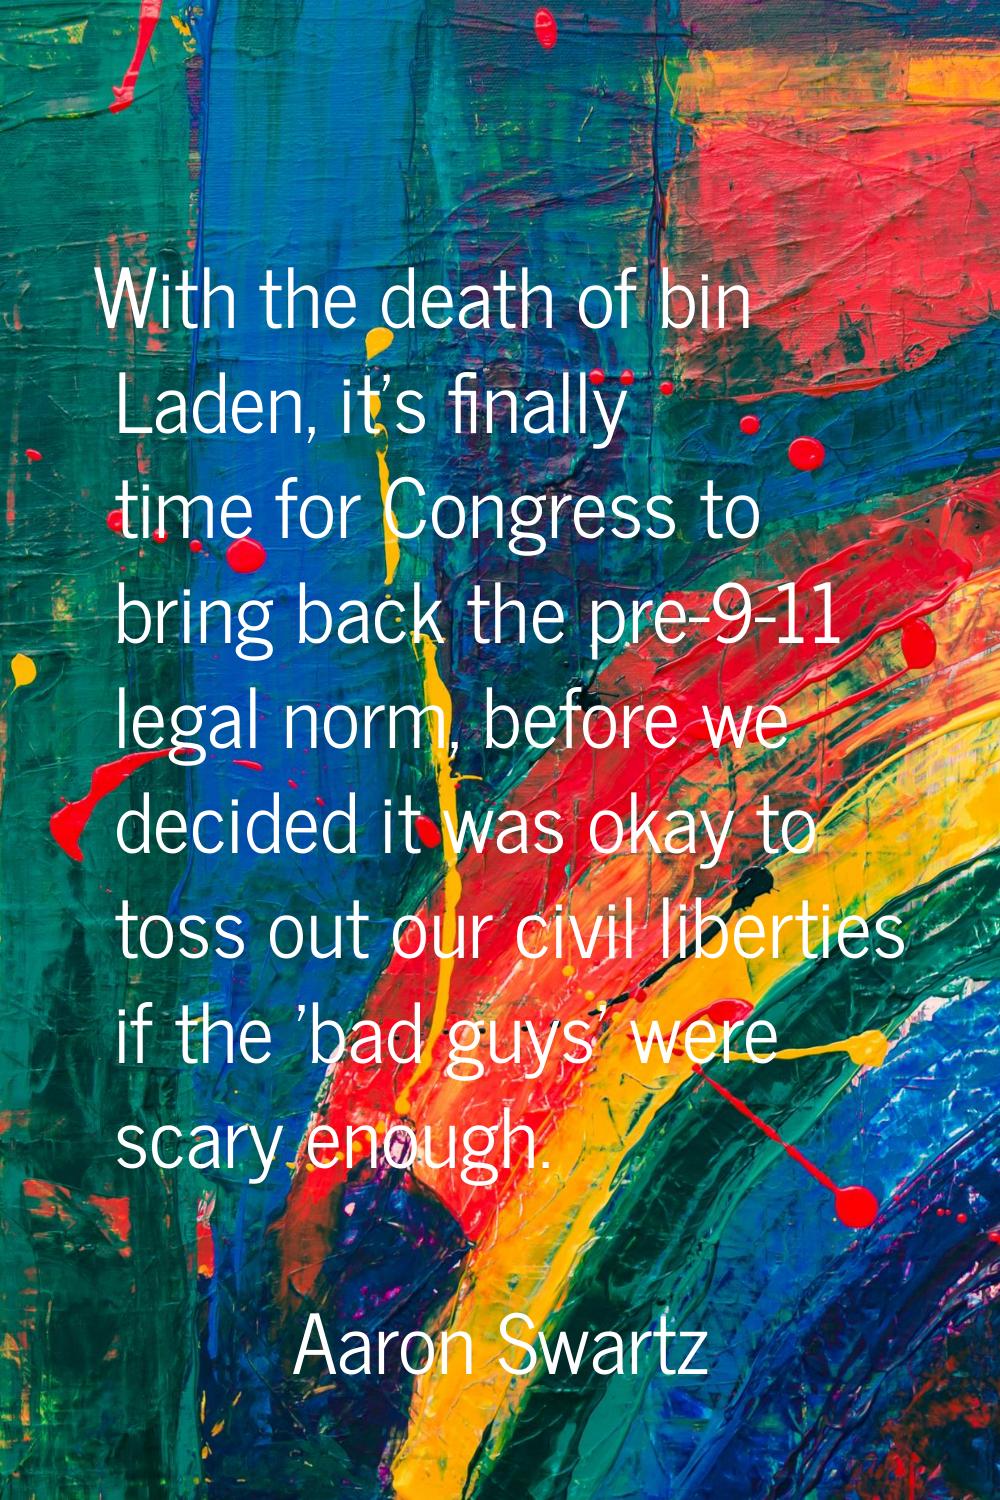 With the death of bin Laden, it's finally time for Congress to bring back the pre-9-11 legal norm, 